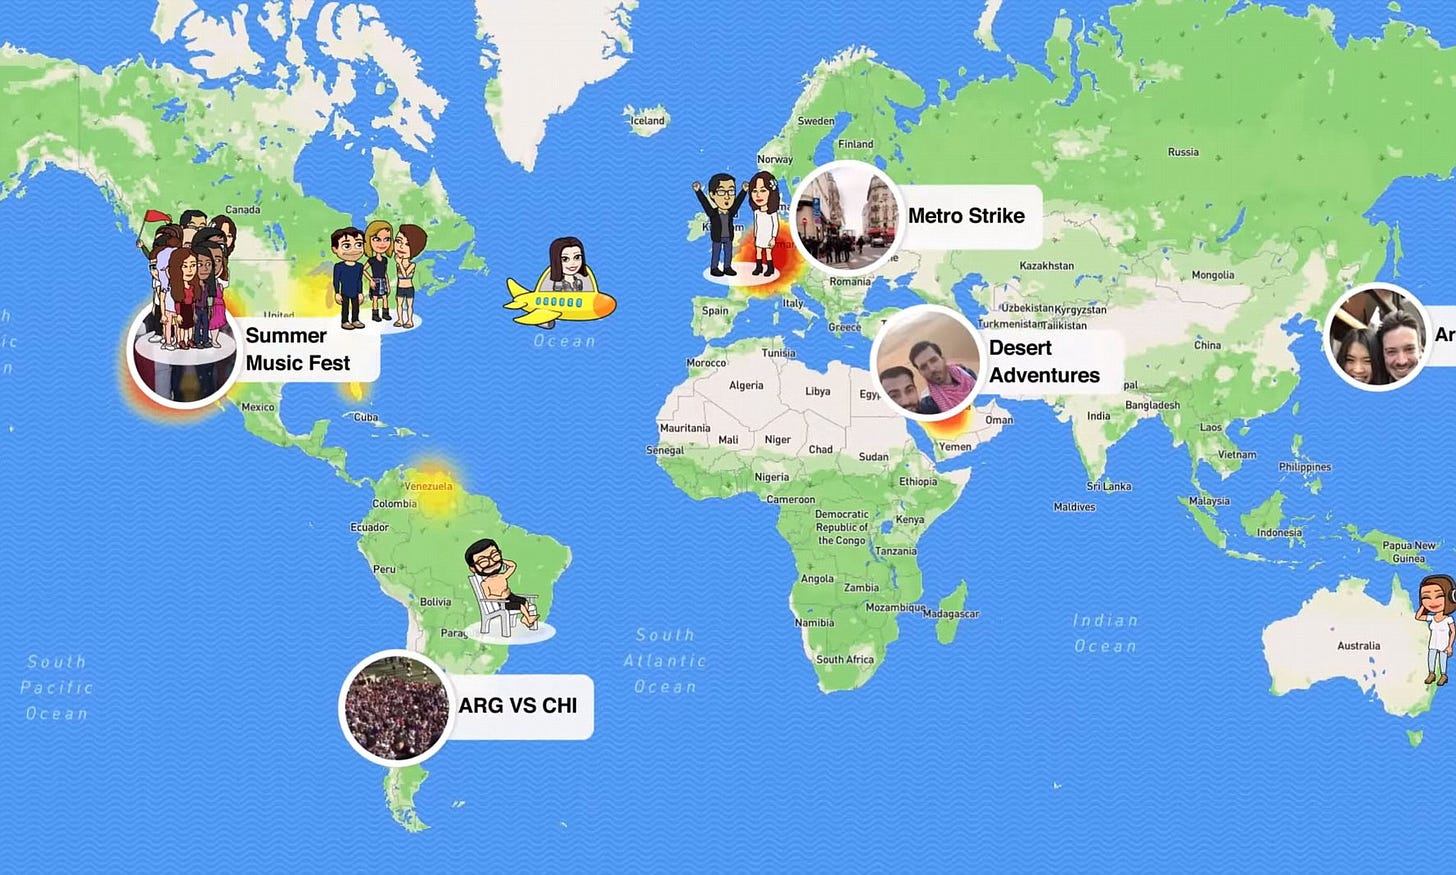 Snapchat's adds weather to create 'world' for Bitmoji | Daily Mail Online